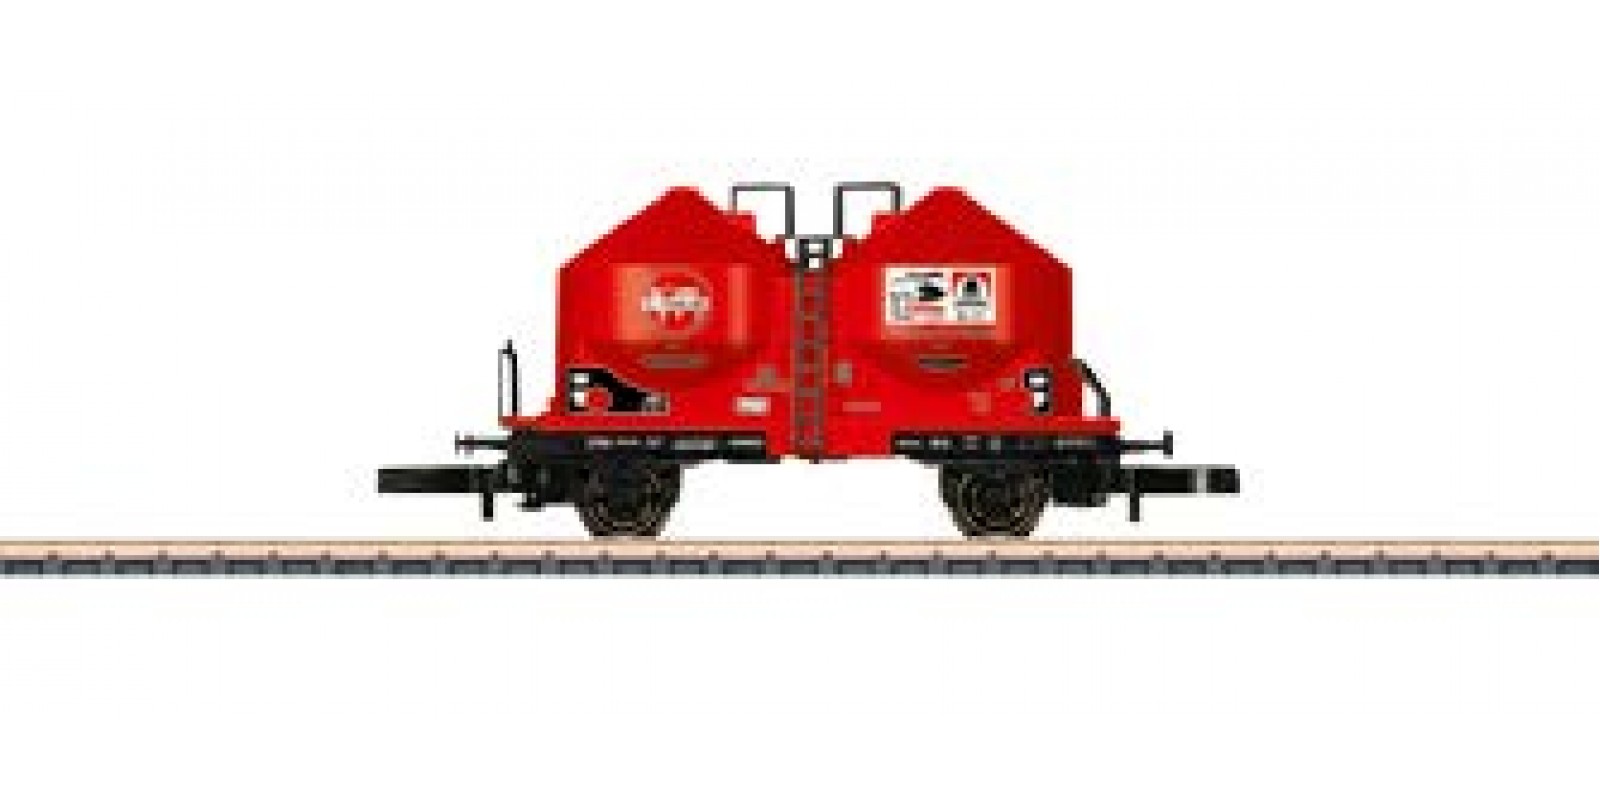 86666 "Spur-Z-Convention 2019" special wagon for IMA 2019 Ζ